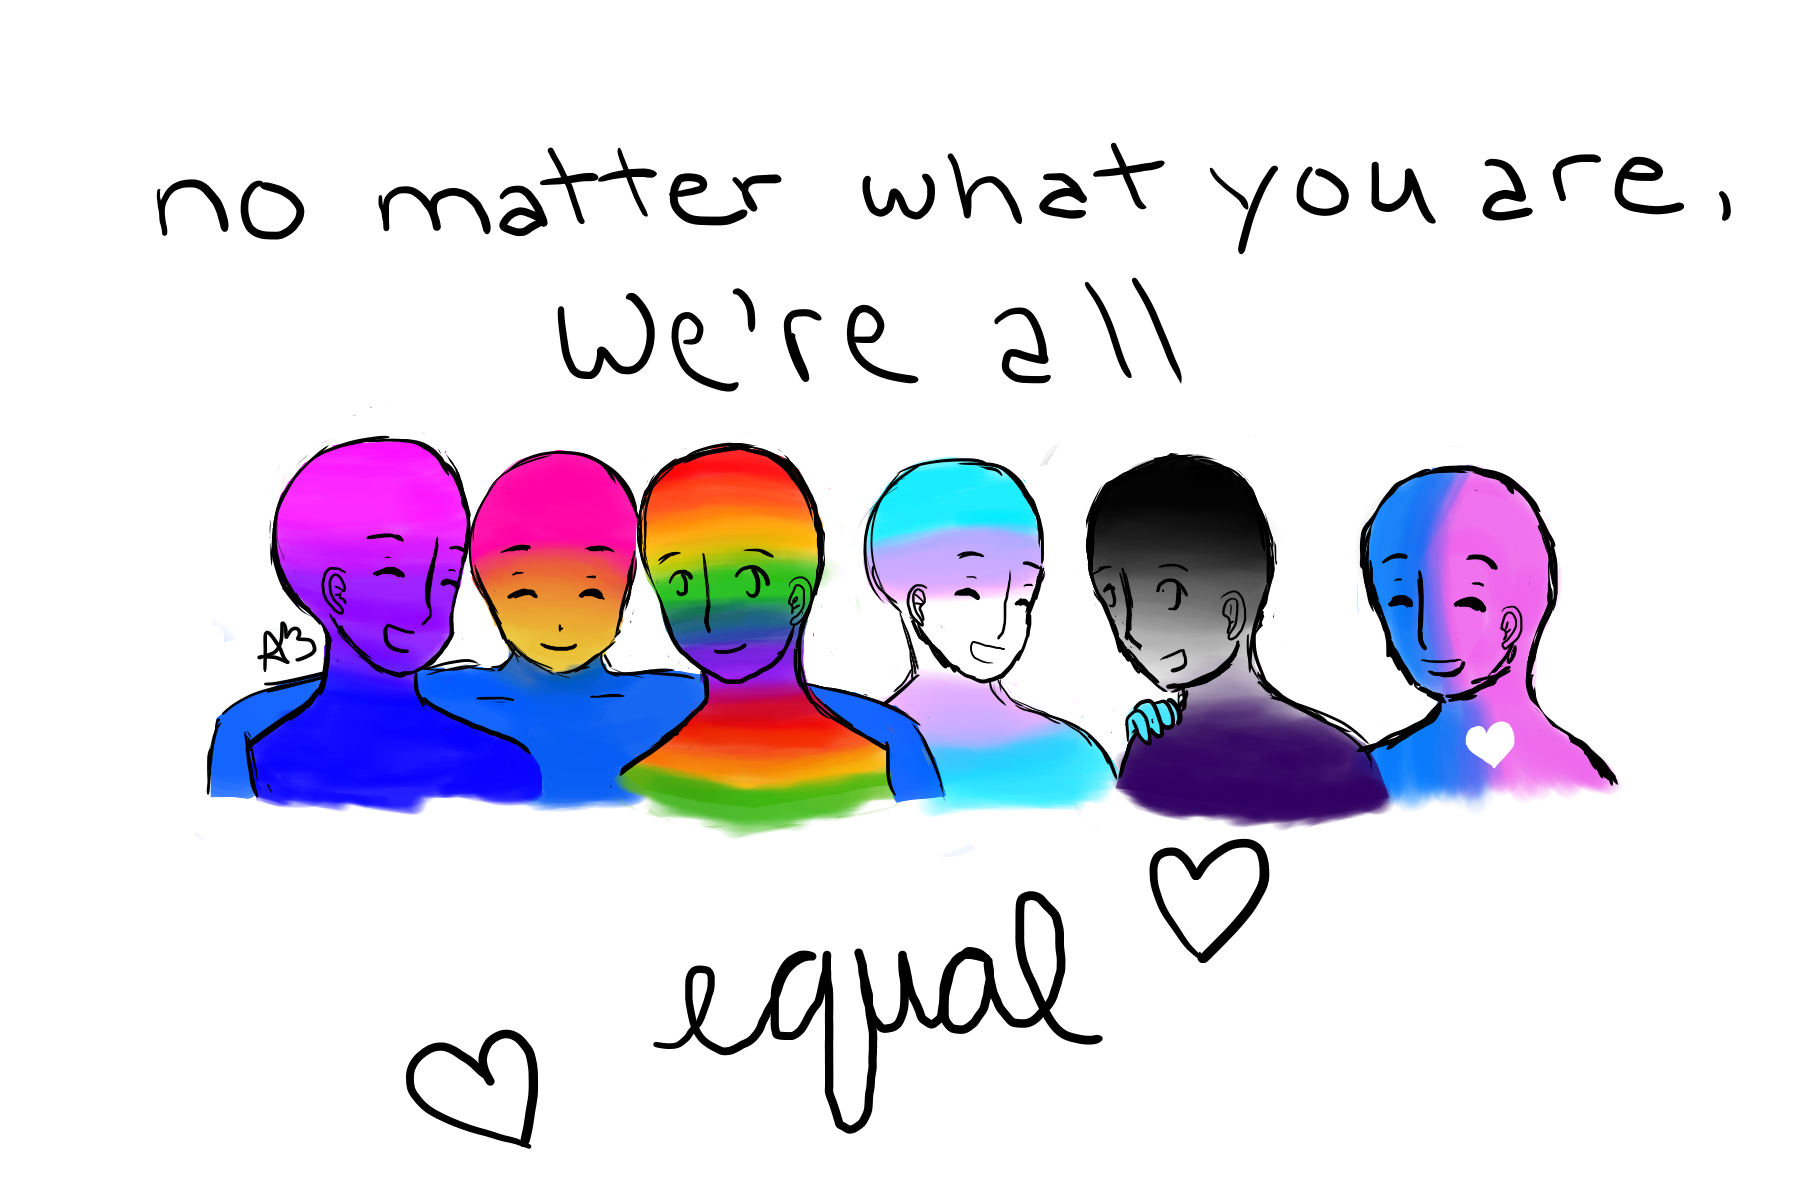 we are all equal